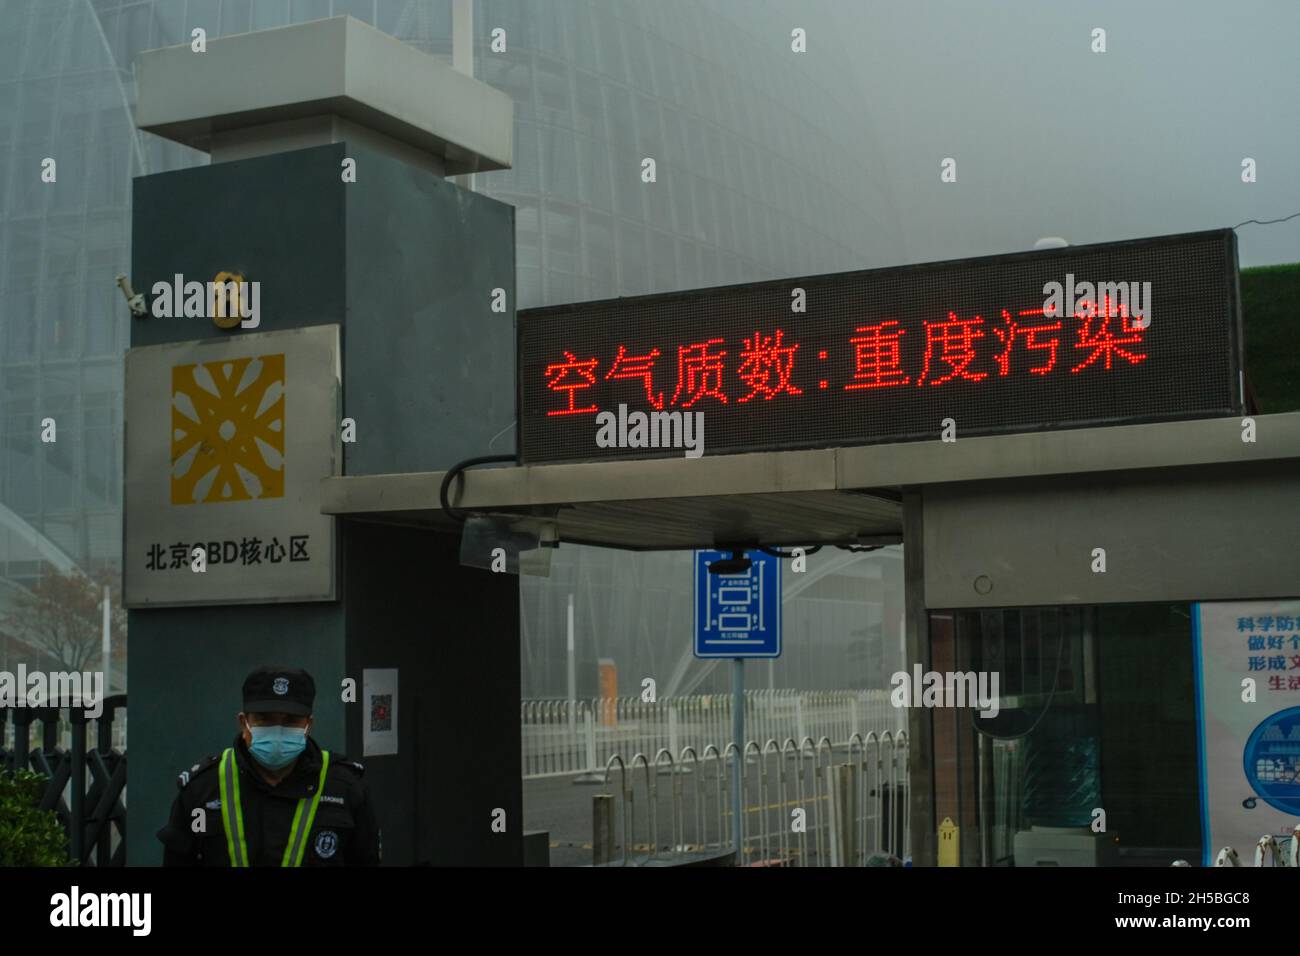 Chinese characters on the LCD screen: Air quality: heavy pollution. A man guards a tower shrouded by heavy smog in Beijing, China. 06-Nov-2021 Stock Photo